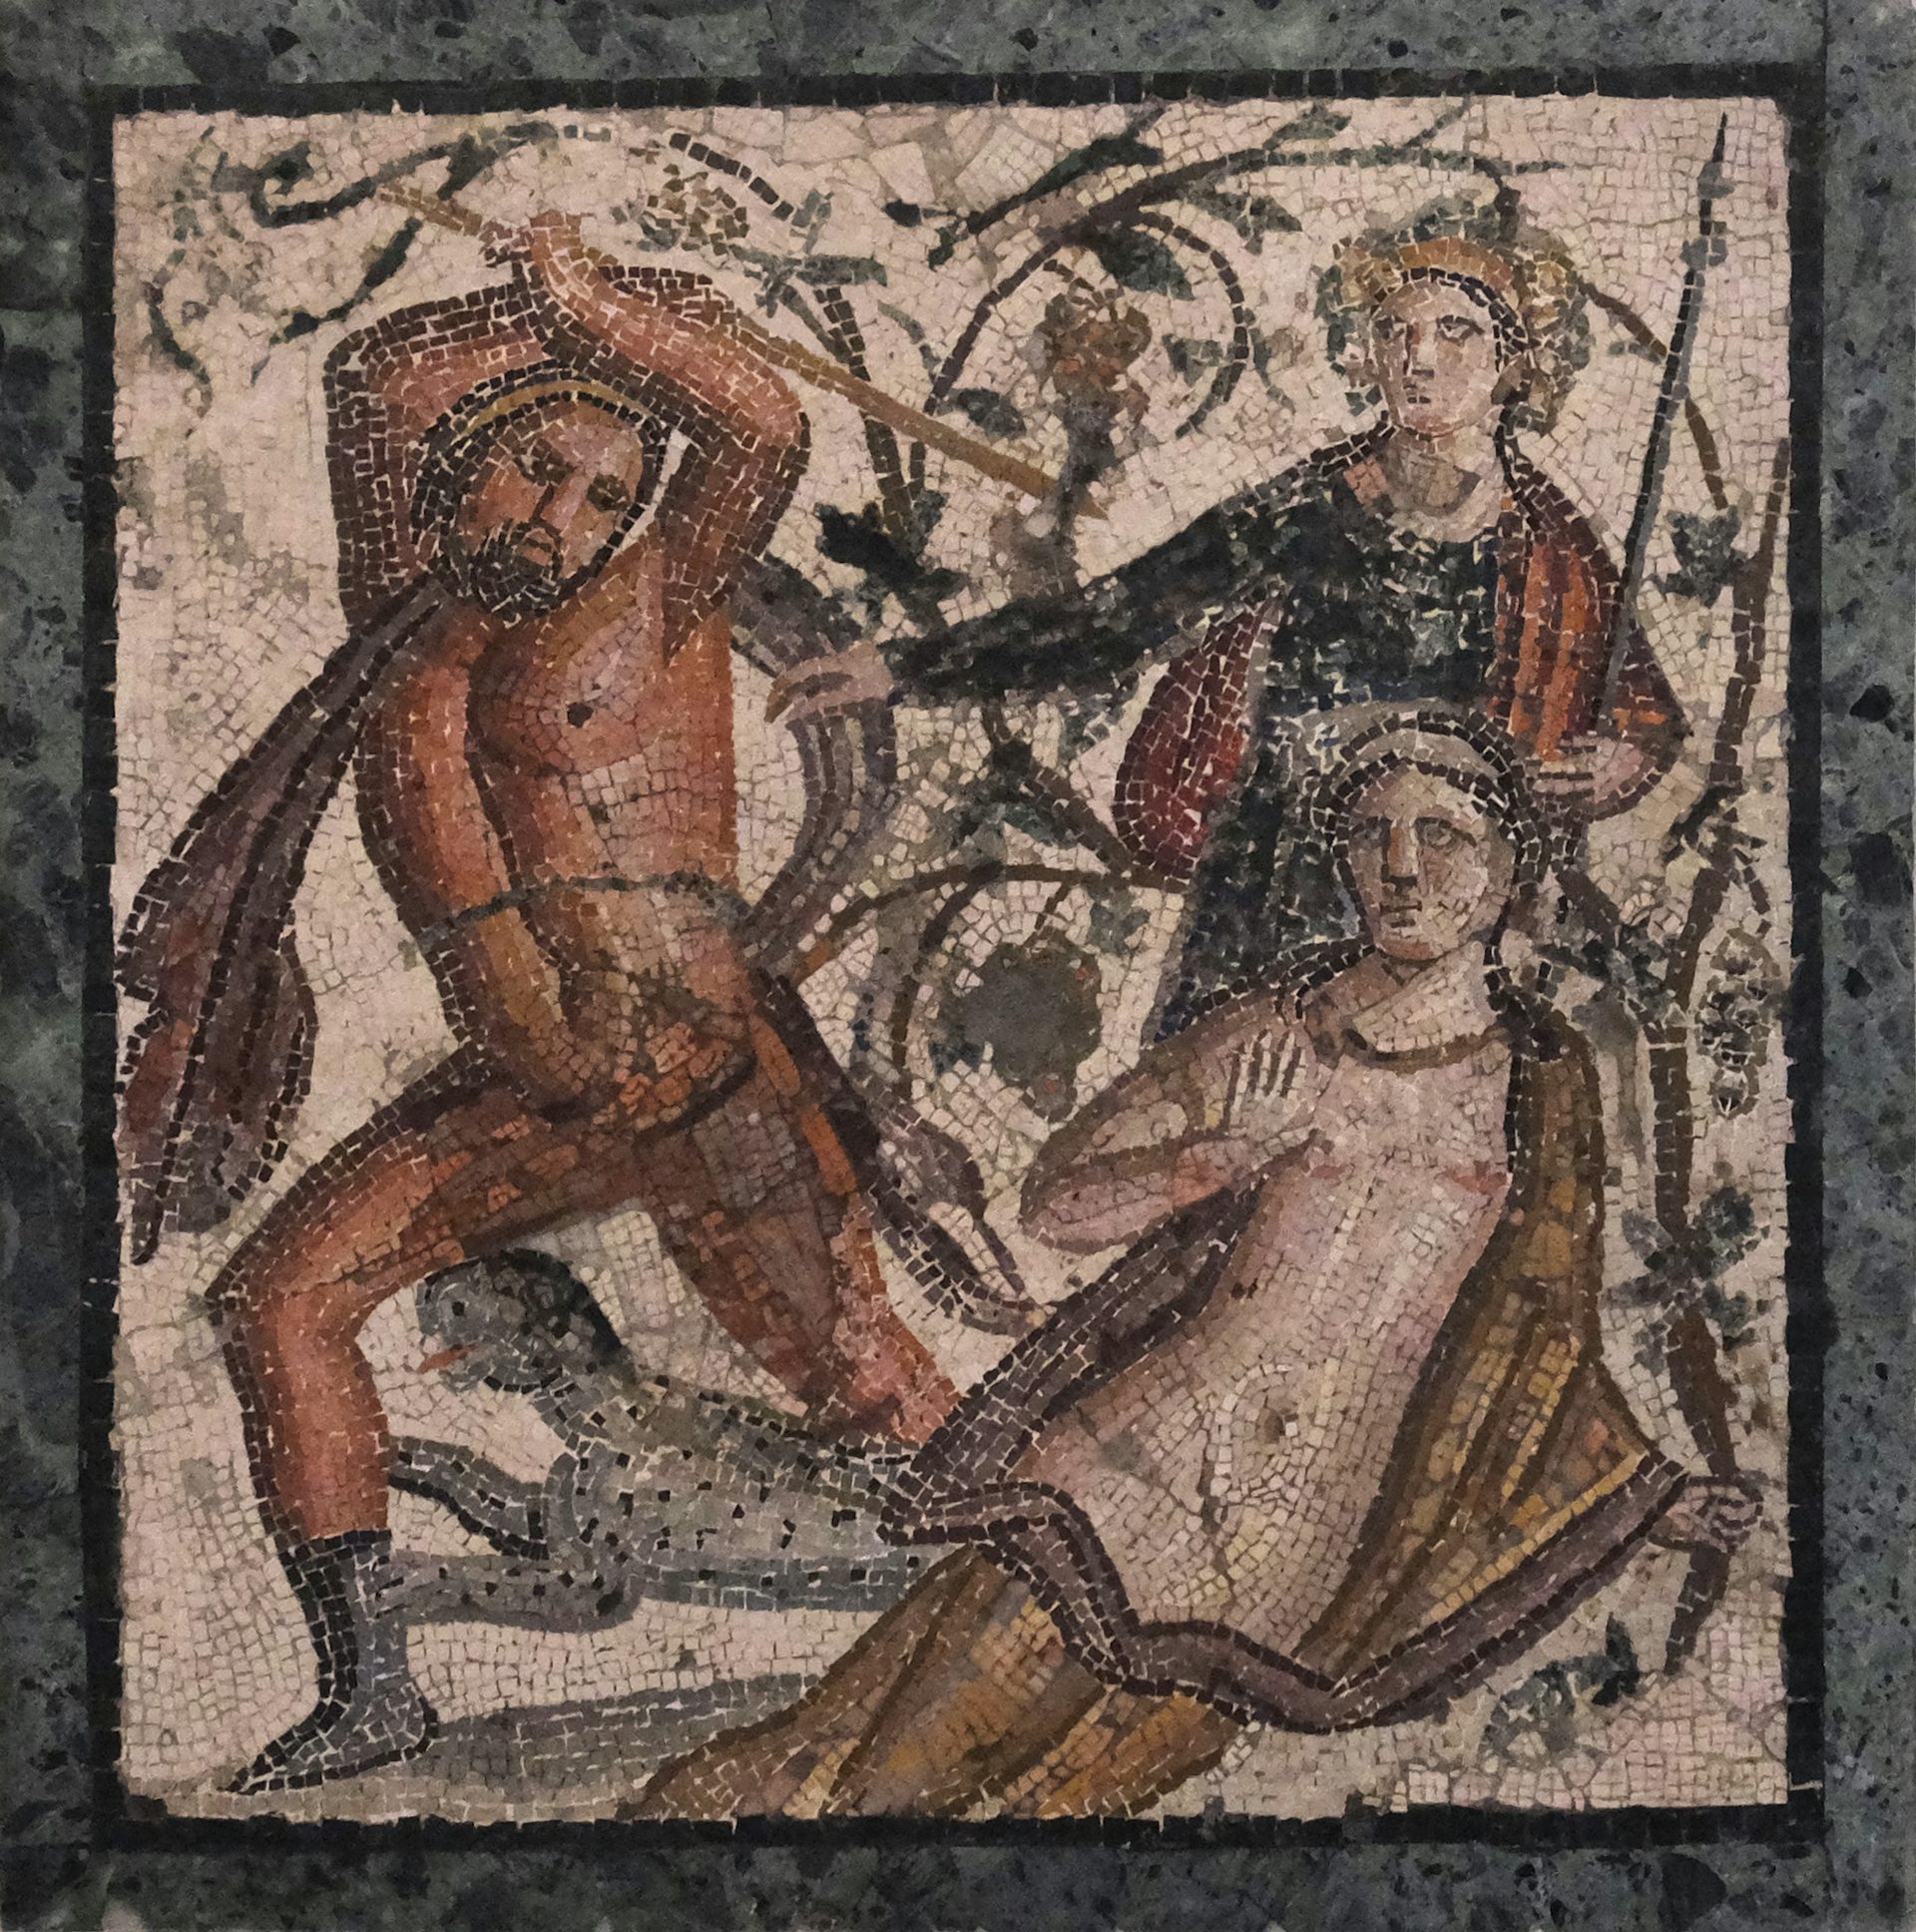 Mosaic of Lycurgus fighting Ambrosia and Dionysus